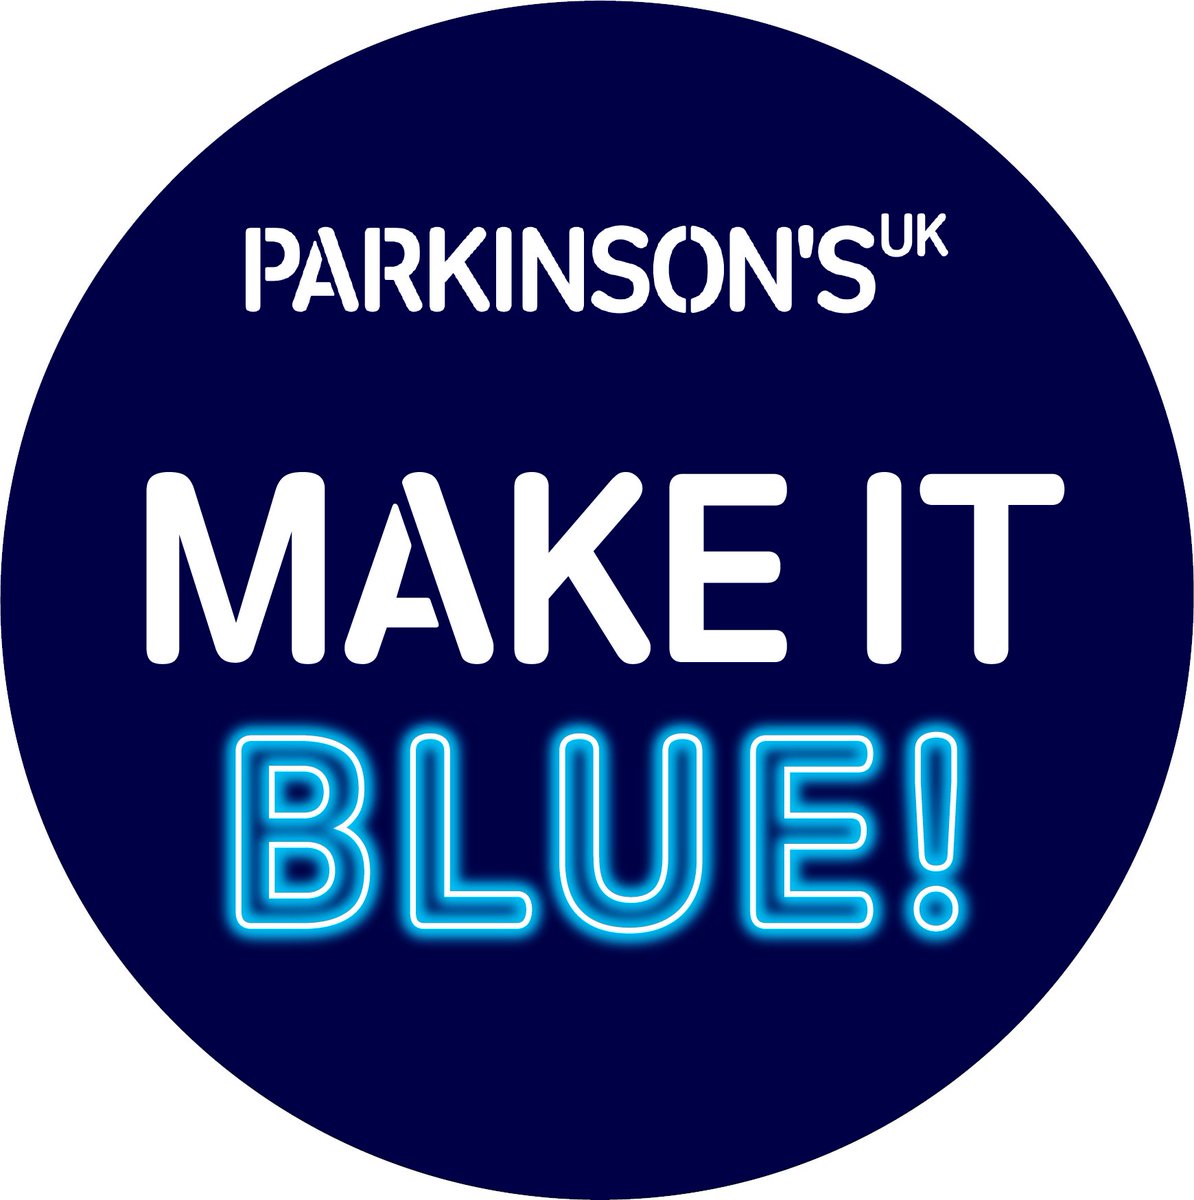 We're onto the final countdown for #WorldParkinsonsDay on Thursday! Be sure to follow @ParkinsonsUK for regular updates as we all move towards the day itself.